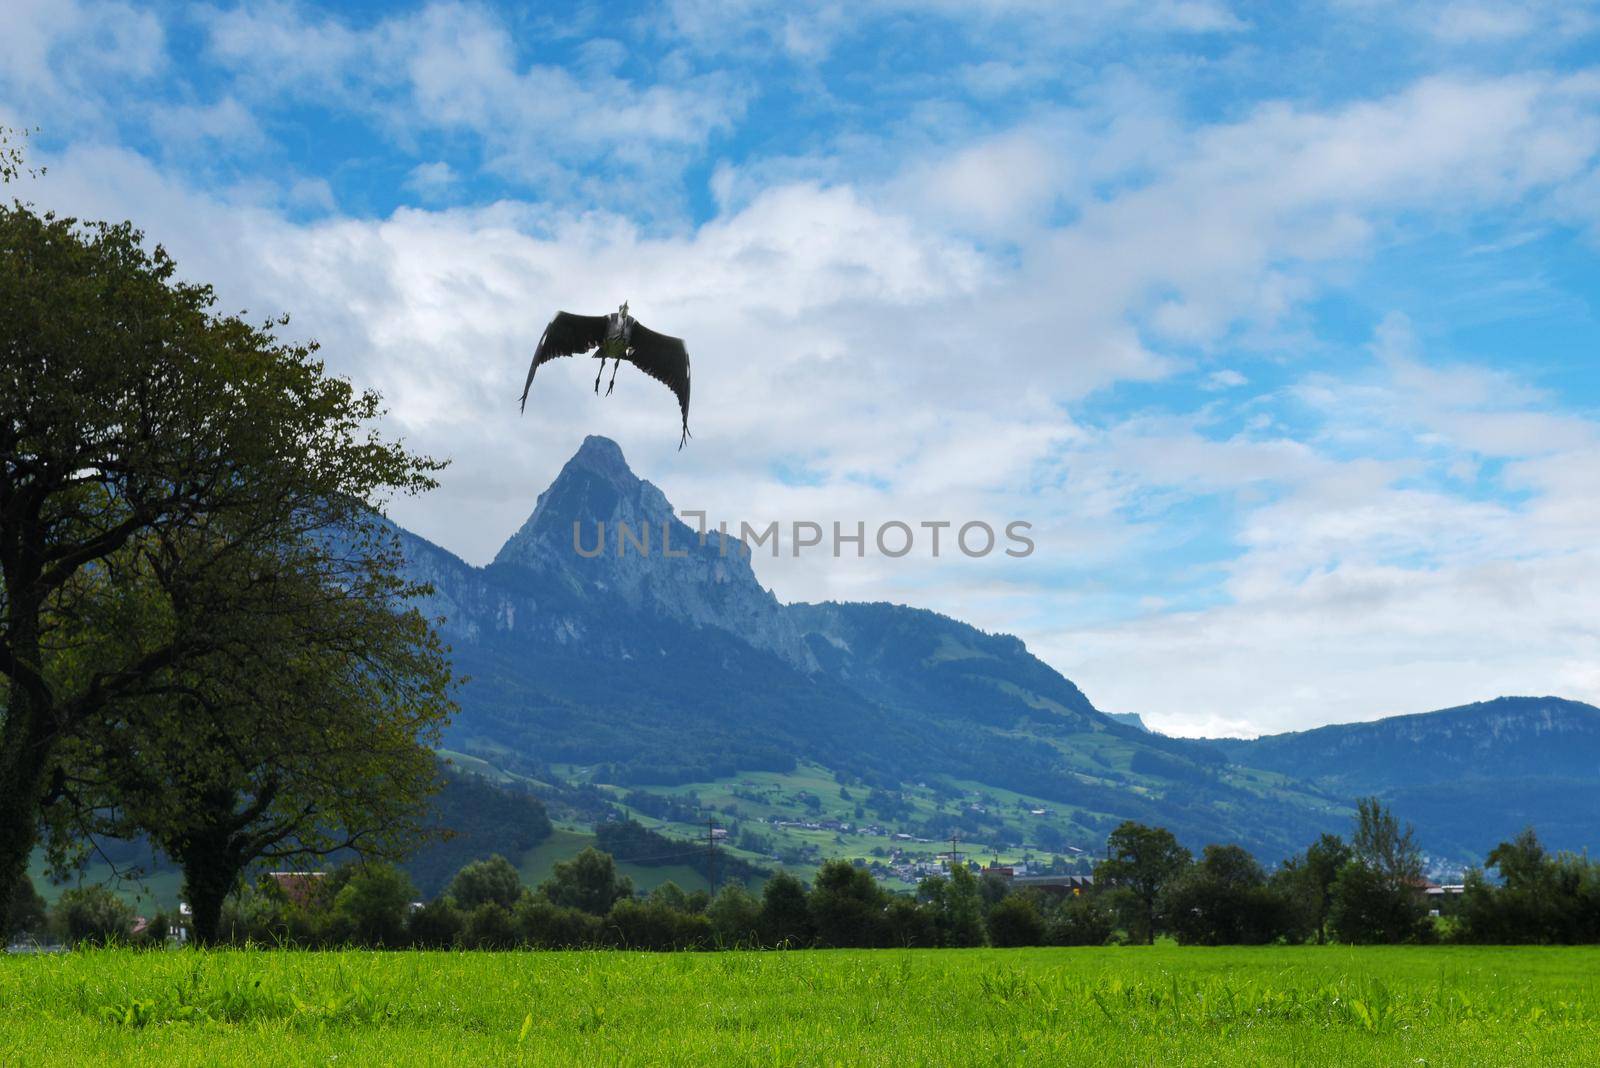 Landscape with mountains and flying bird, Switzerland Alps by anytka